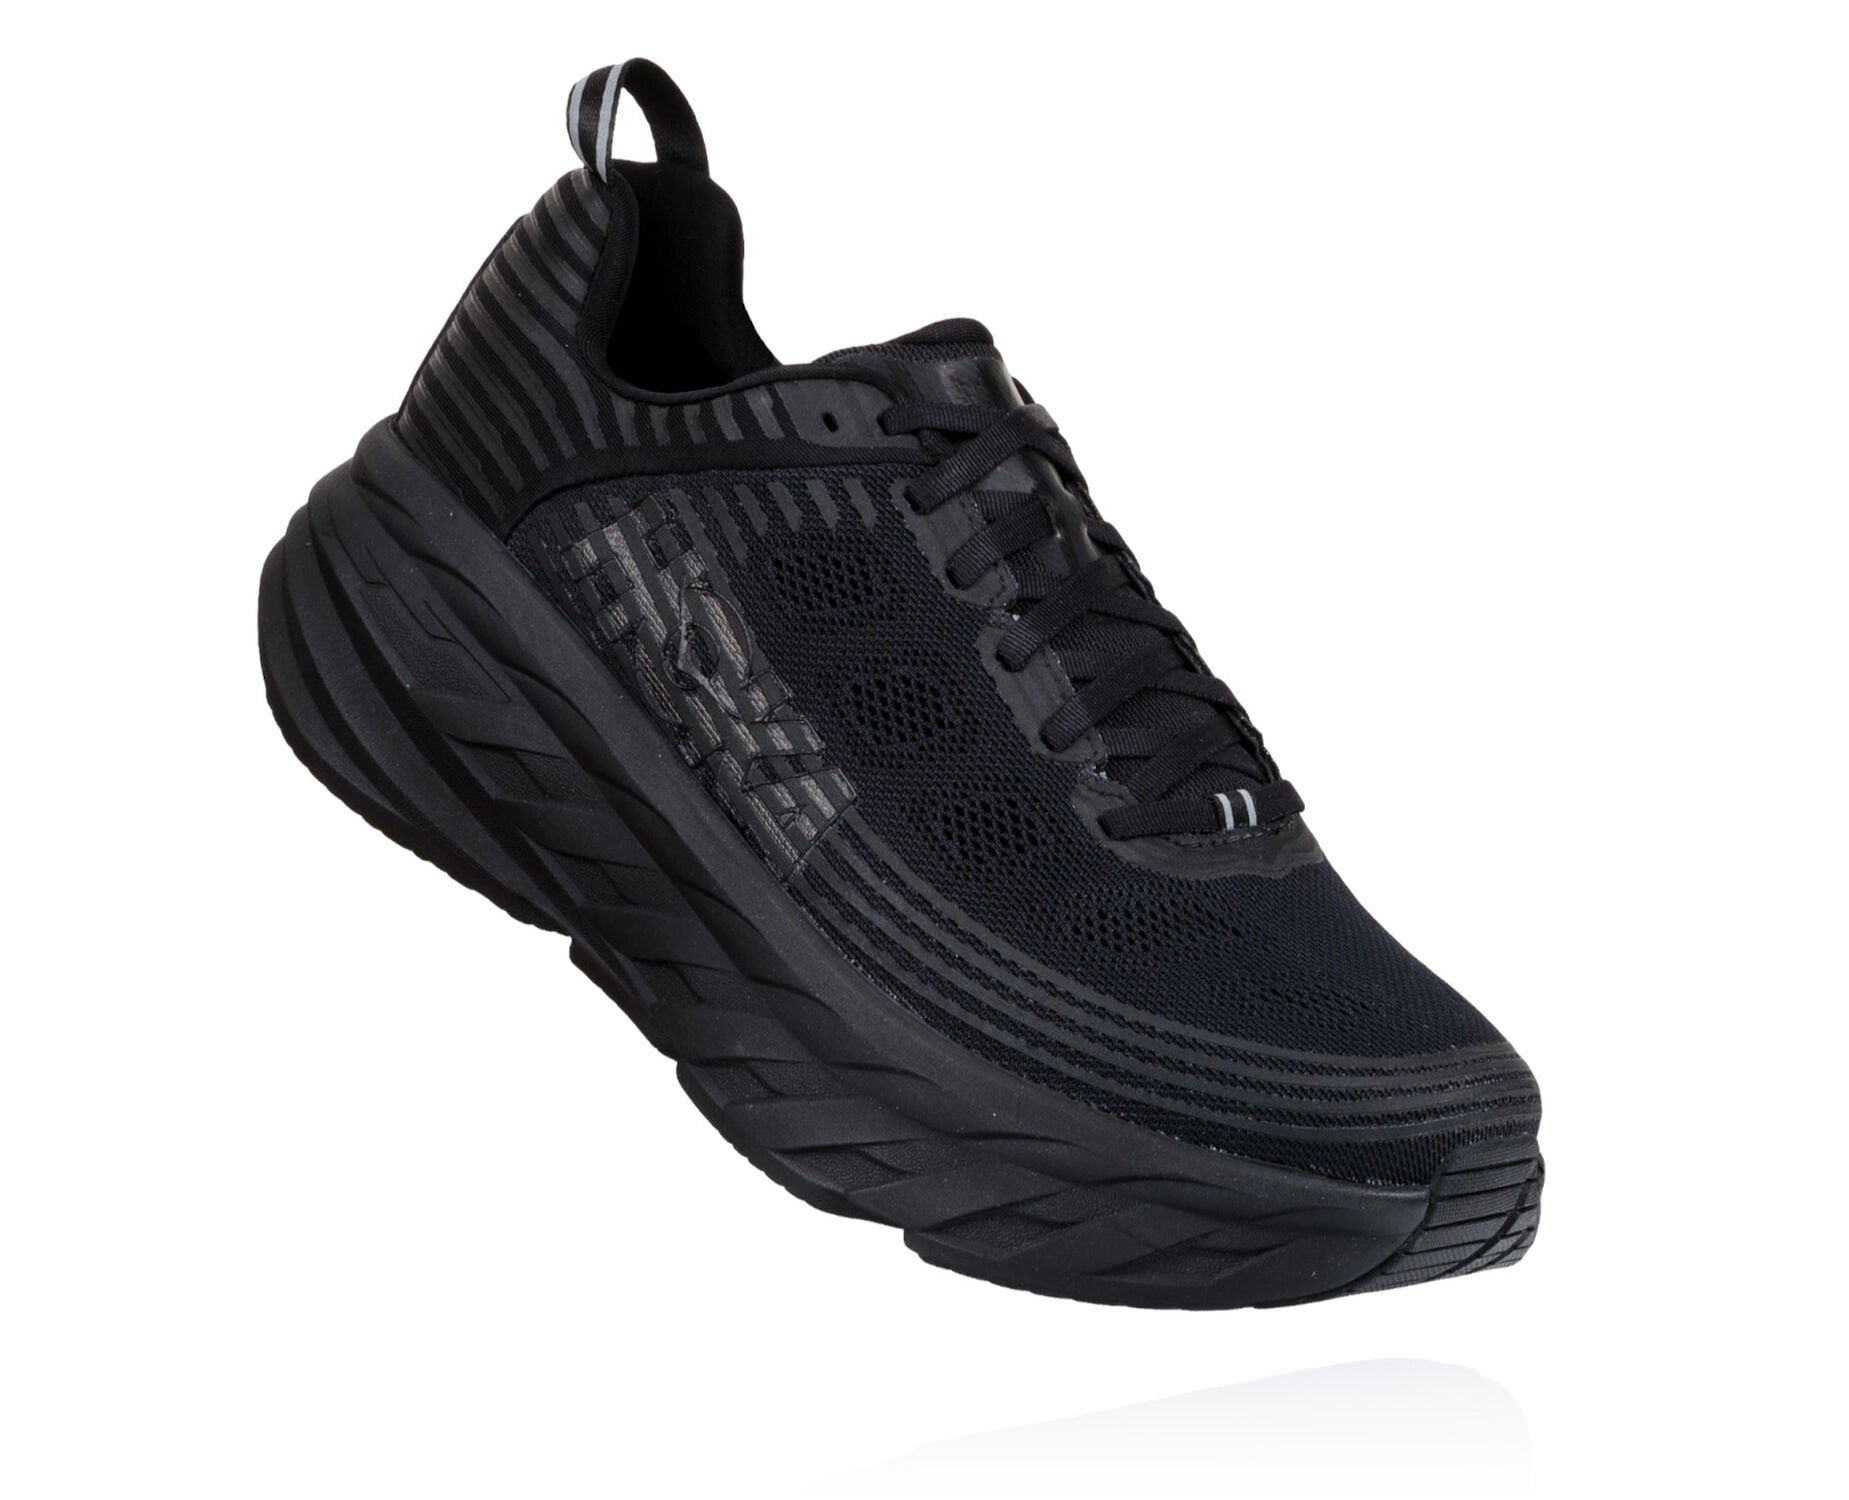 Hoka One One Men’s Size 10.5 M Gray Sneakers Lace Up Running Shoes ...